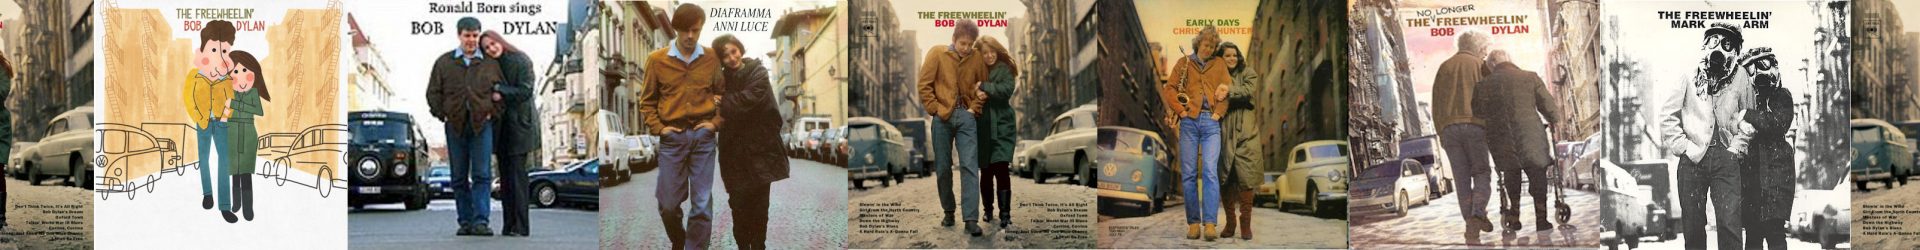 BILL FAY: The Coast No Man Can Tell – BOB DYLAN: Blowin’ in the Wind